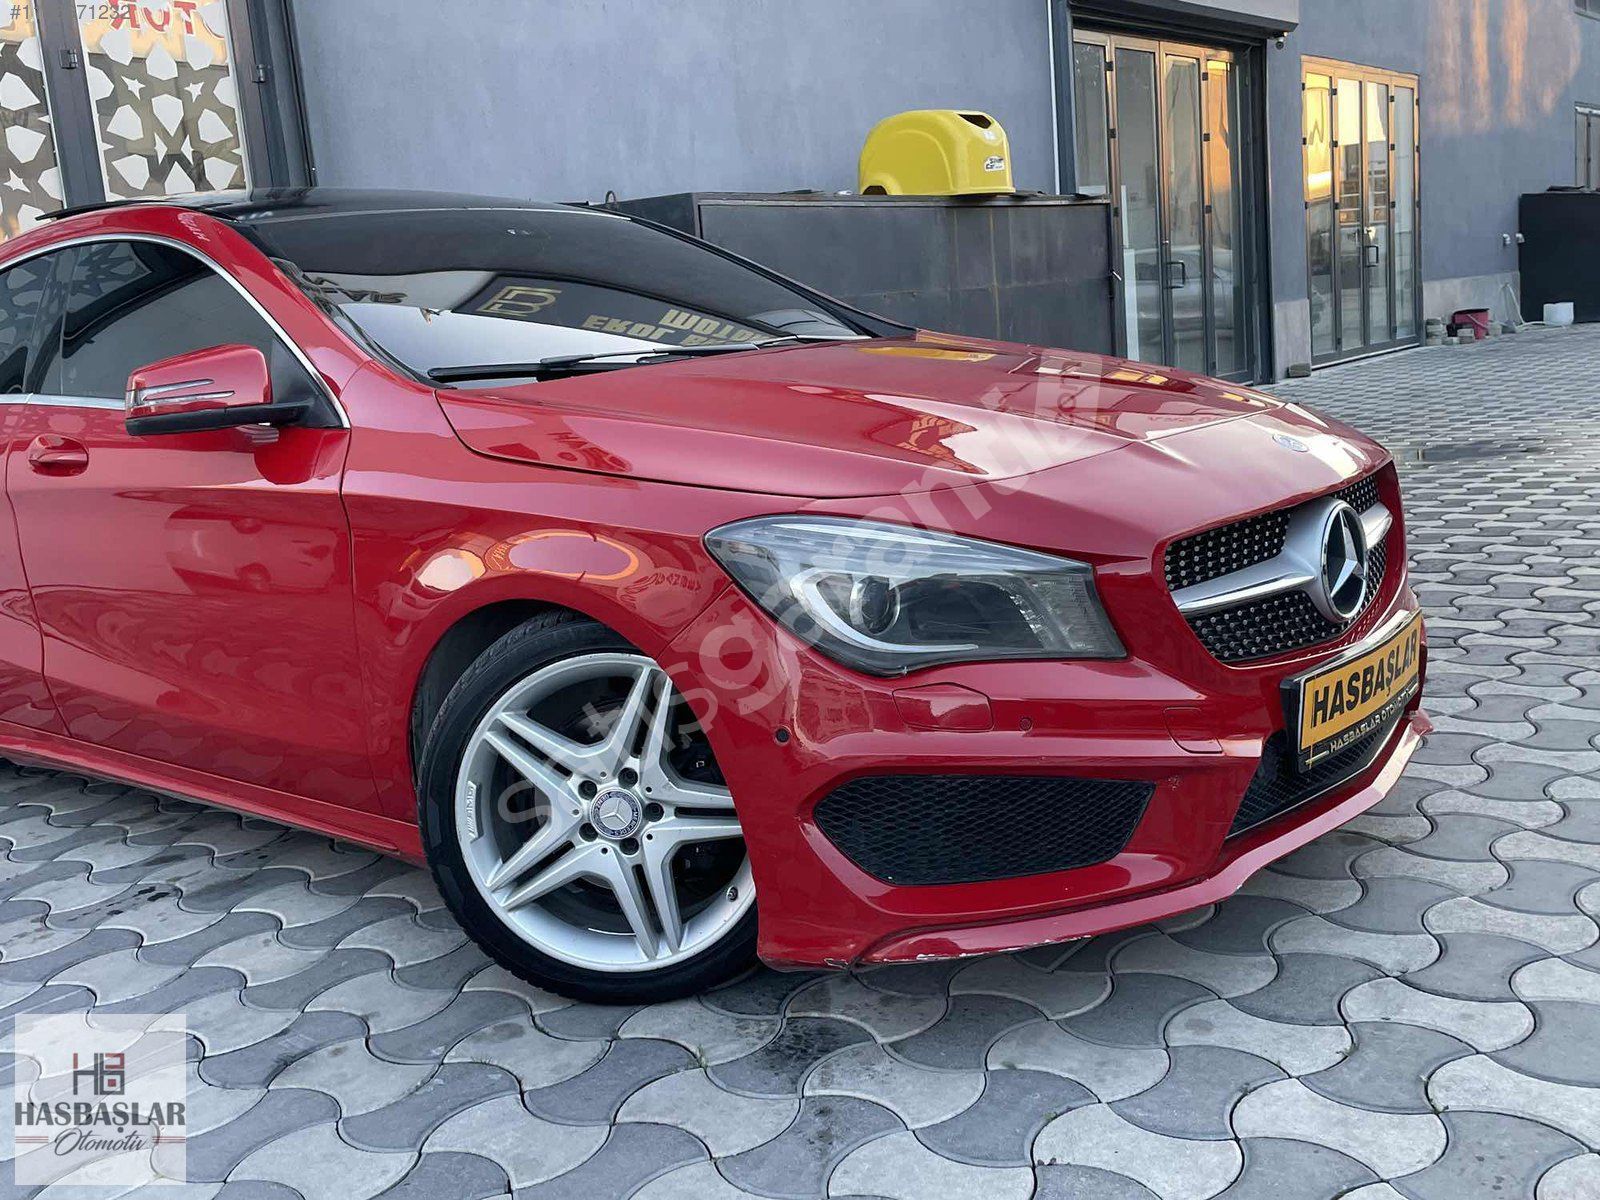 MERCEDES BENZ CLA 180d AMG SPECİAL EDİTİON ÇİFT HAFIZA ISITMA